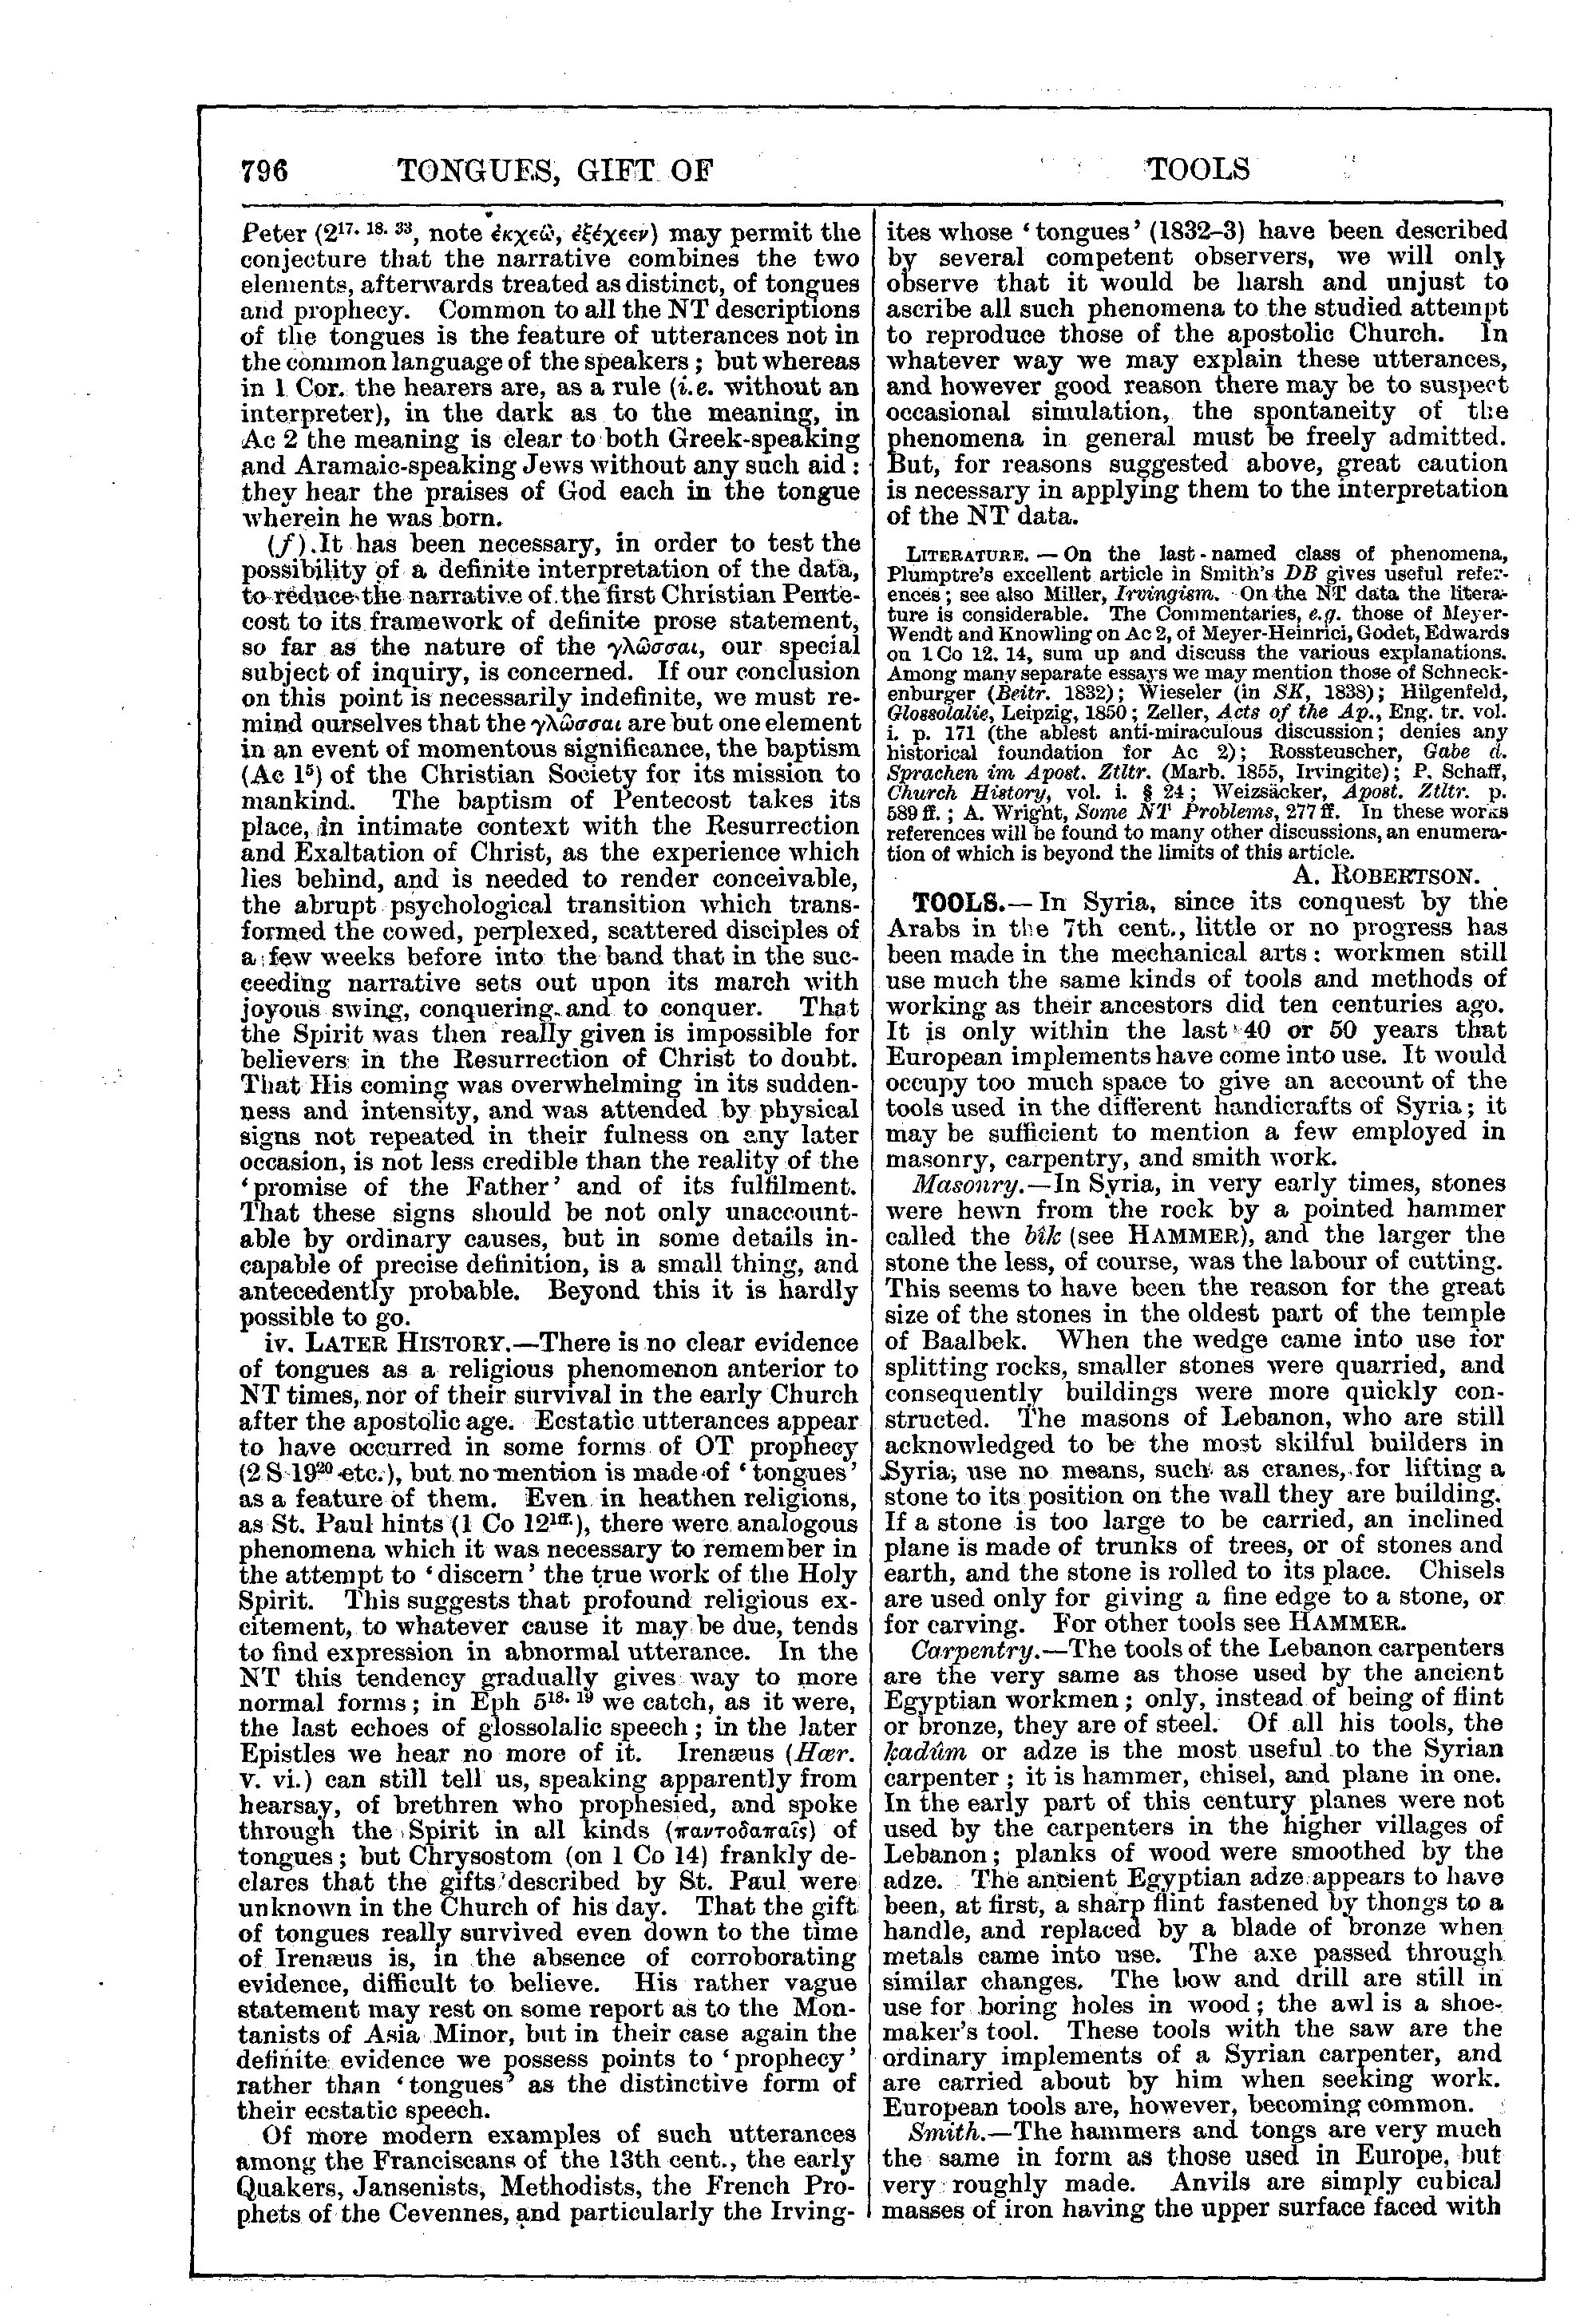 Image of page 796